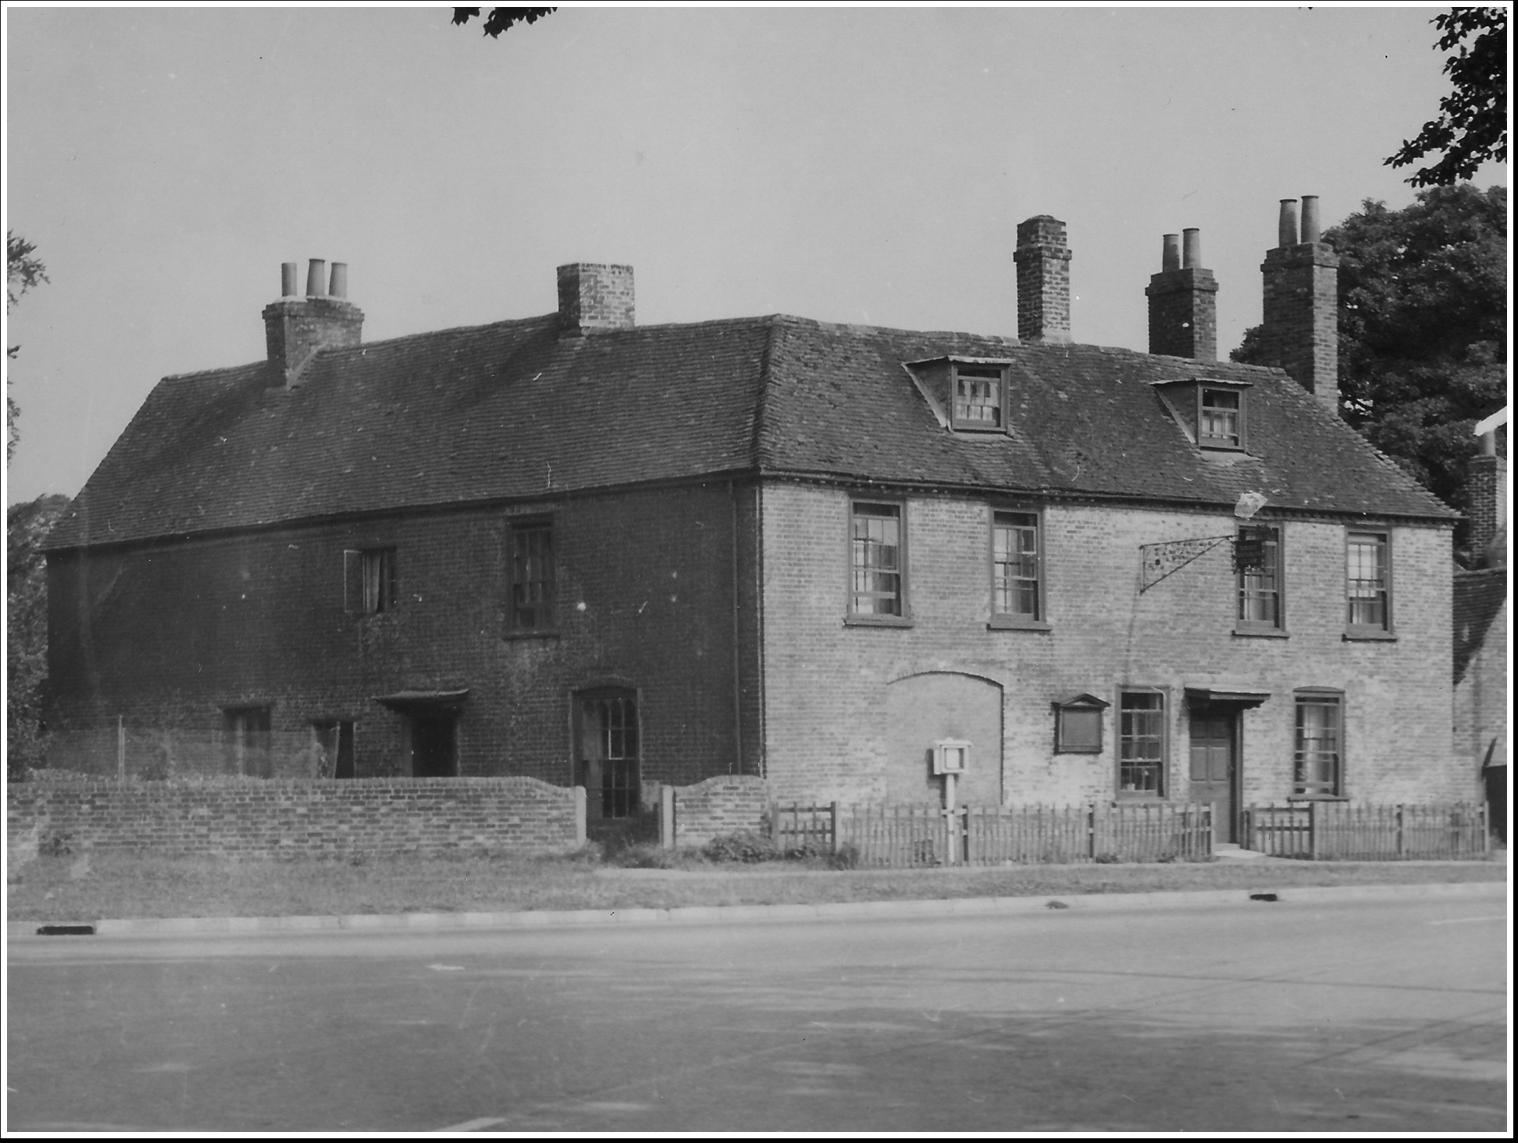 black and white photograph of Jane Austen's House, early 20th century